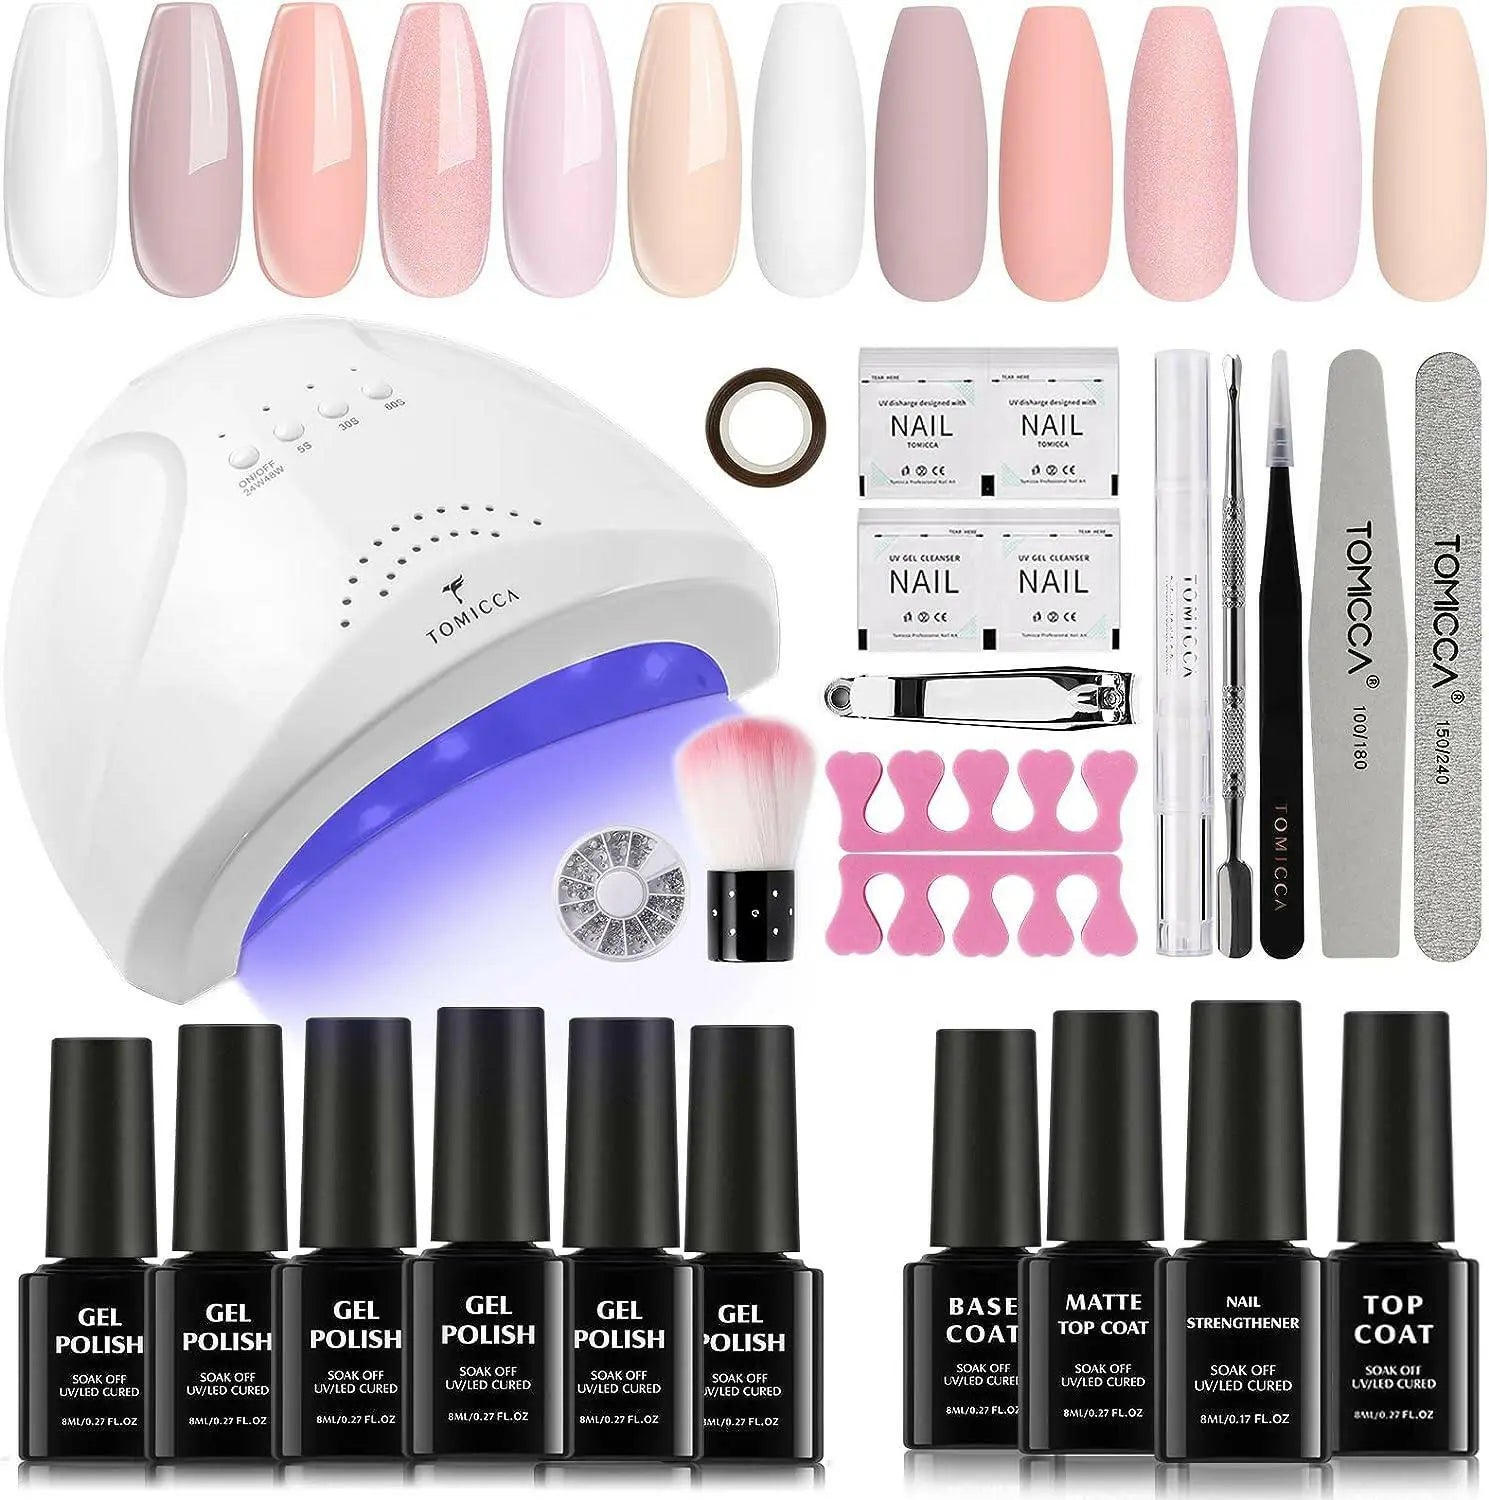 TOMICCA Gel Nail Polish Set Starter Kit, 6 Colors Nude Pink White and Base Top Coat Gel Polish with 48W UV Nail Lamp Dryer(3 Timer Setting), Essentials Nail Art Tools Accessories